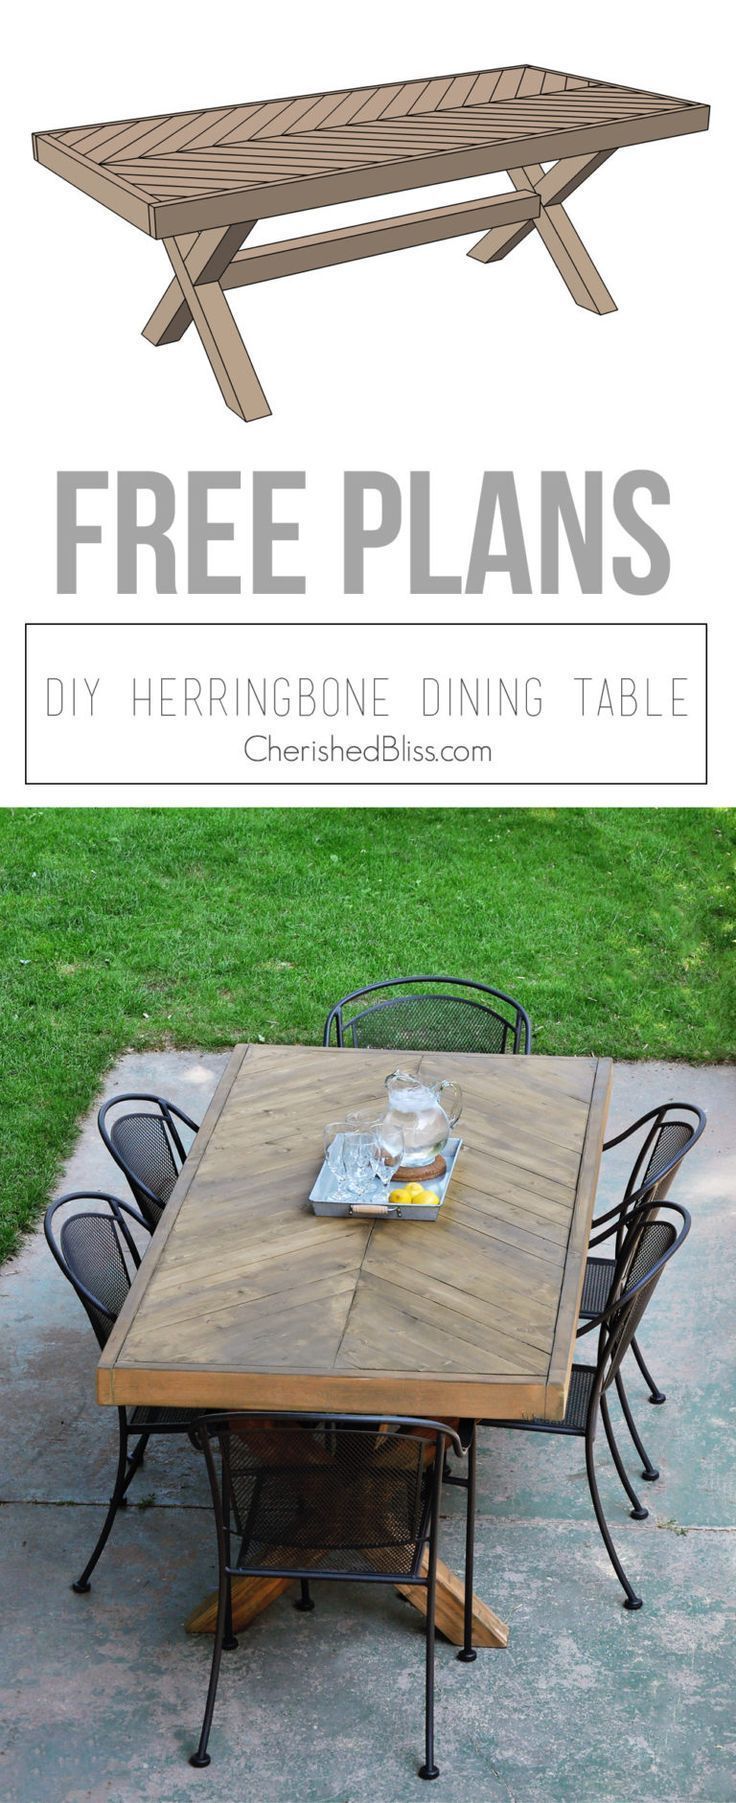 DIY Outdoor Table | Free Plans - Cherished Bliss - DIY Outdoor Table | Free Plans - Cherished Bliss -   18 diy Table outdoor ideas